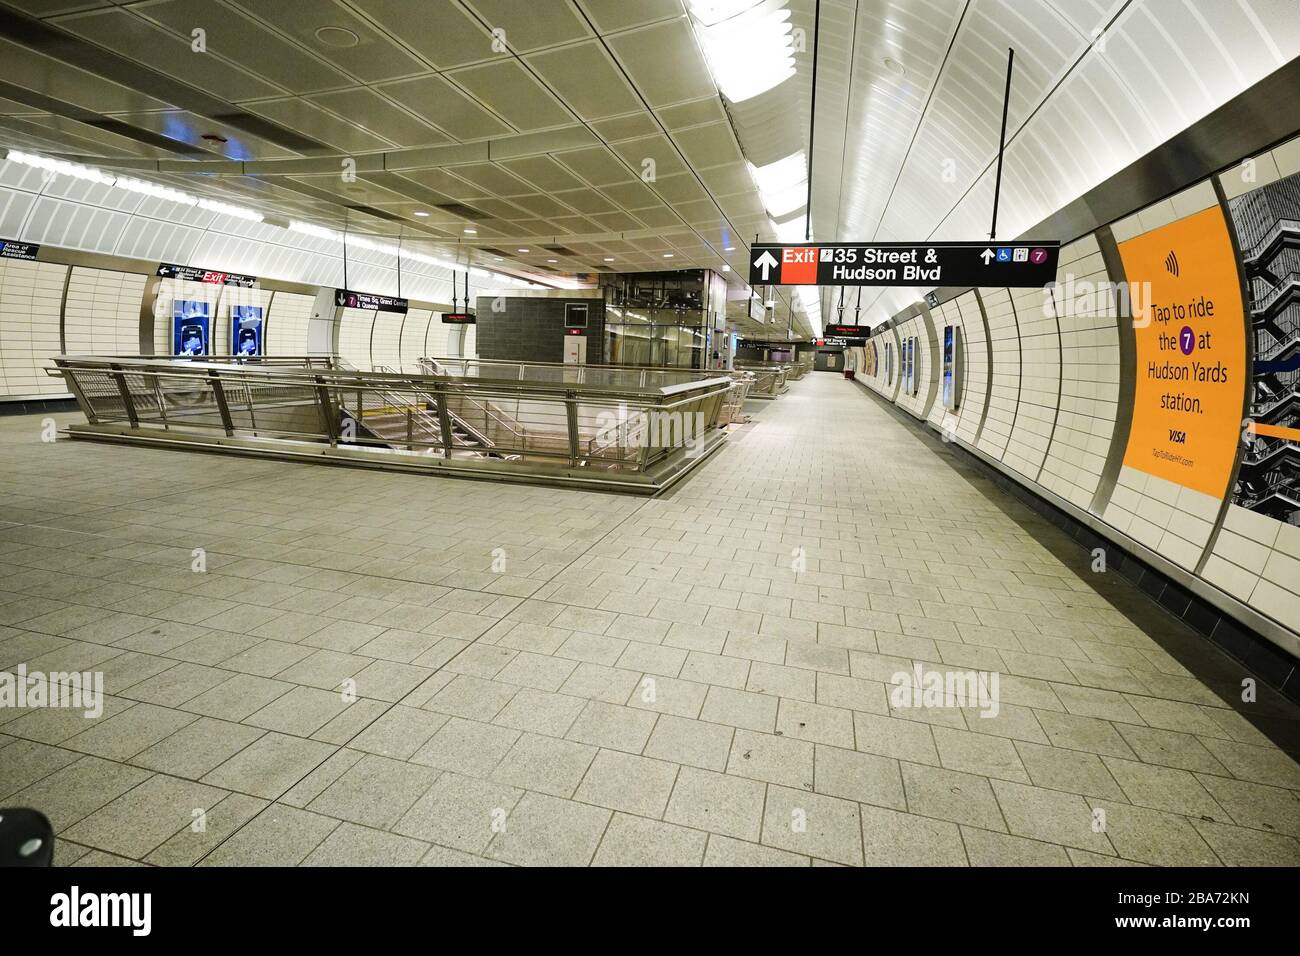 New York, United States. 15th Mar, 2020. General overall view of the empty MTA - 34th Street Hudson Yards Subway Station in the wake of the coronavirus COVID-19 pandemic outbreak, Sunday, March 15, 2020, in New York. (John Nacion/Image of Sport via AP) Photo via Credit: Newscom/Alamy Live News Stock Photo